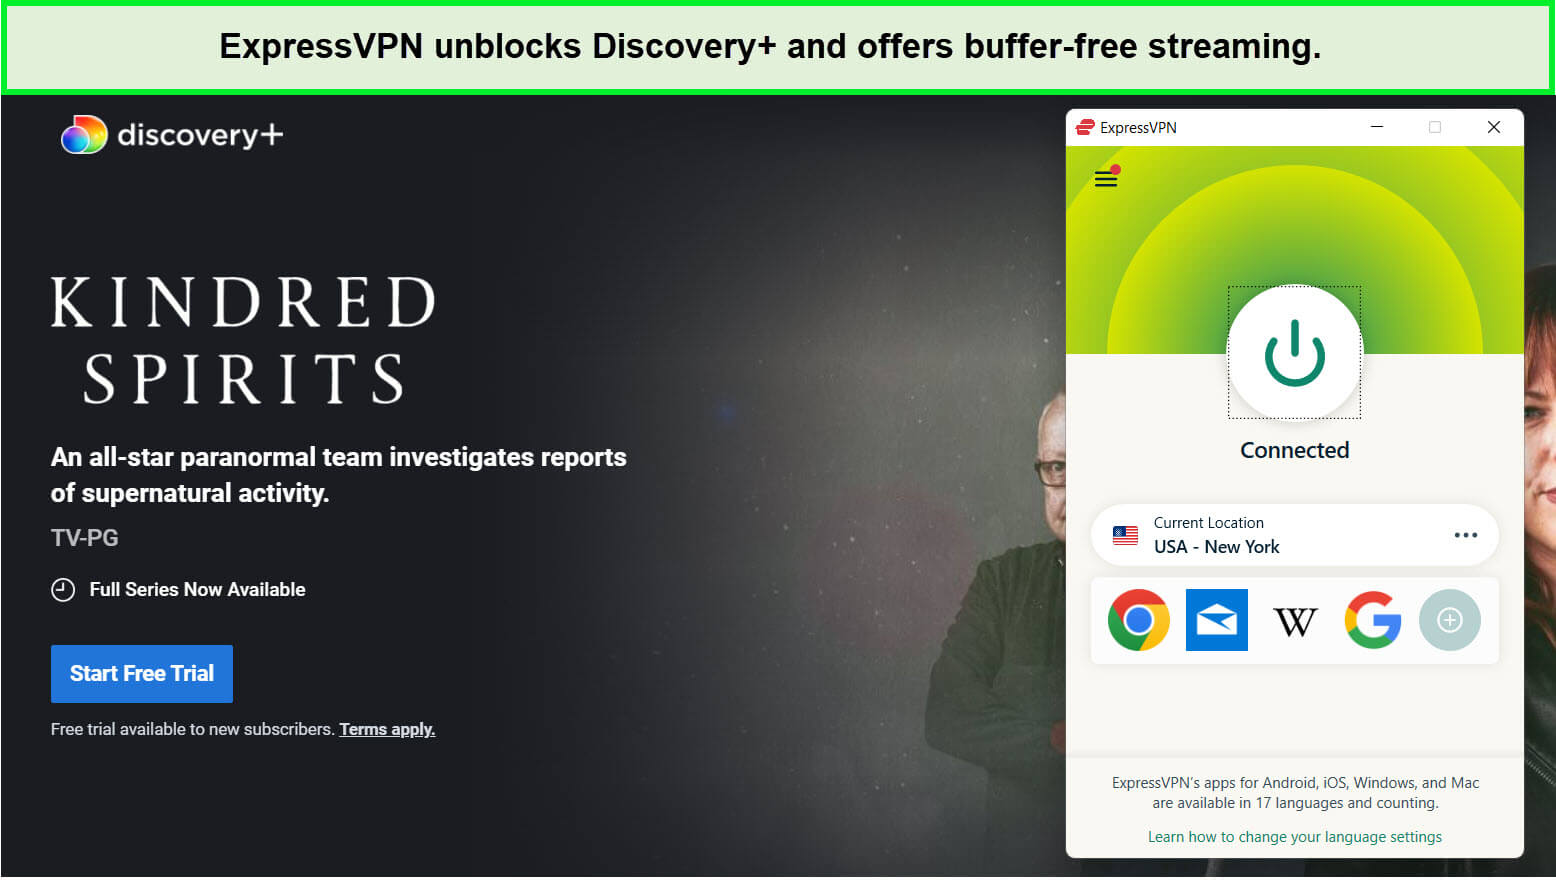 expressvpn-unblocks-kindred-spirits-s7-on-discovery-plus-in-uk